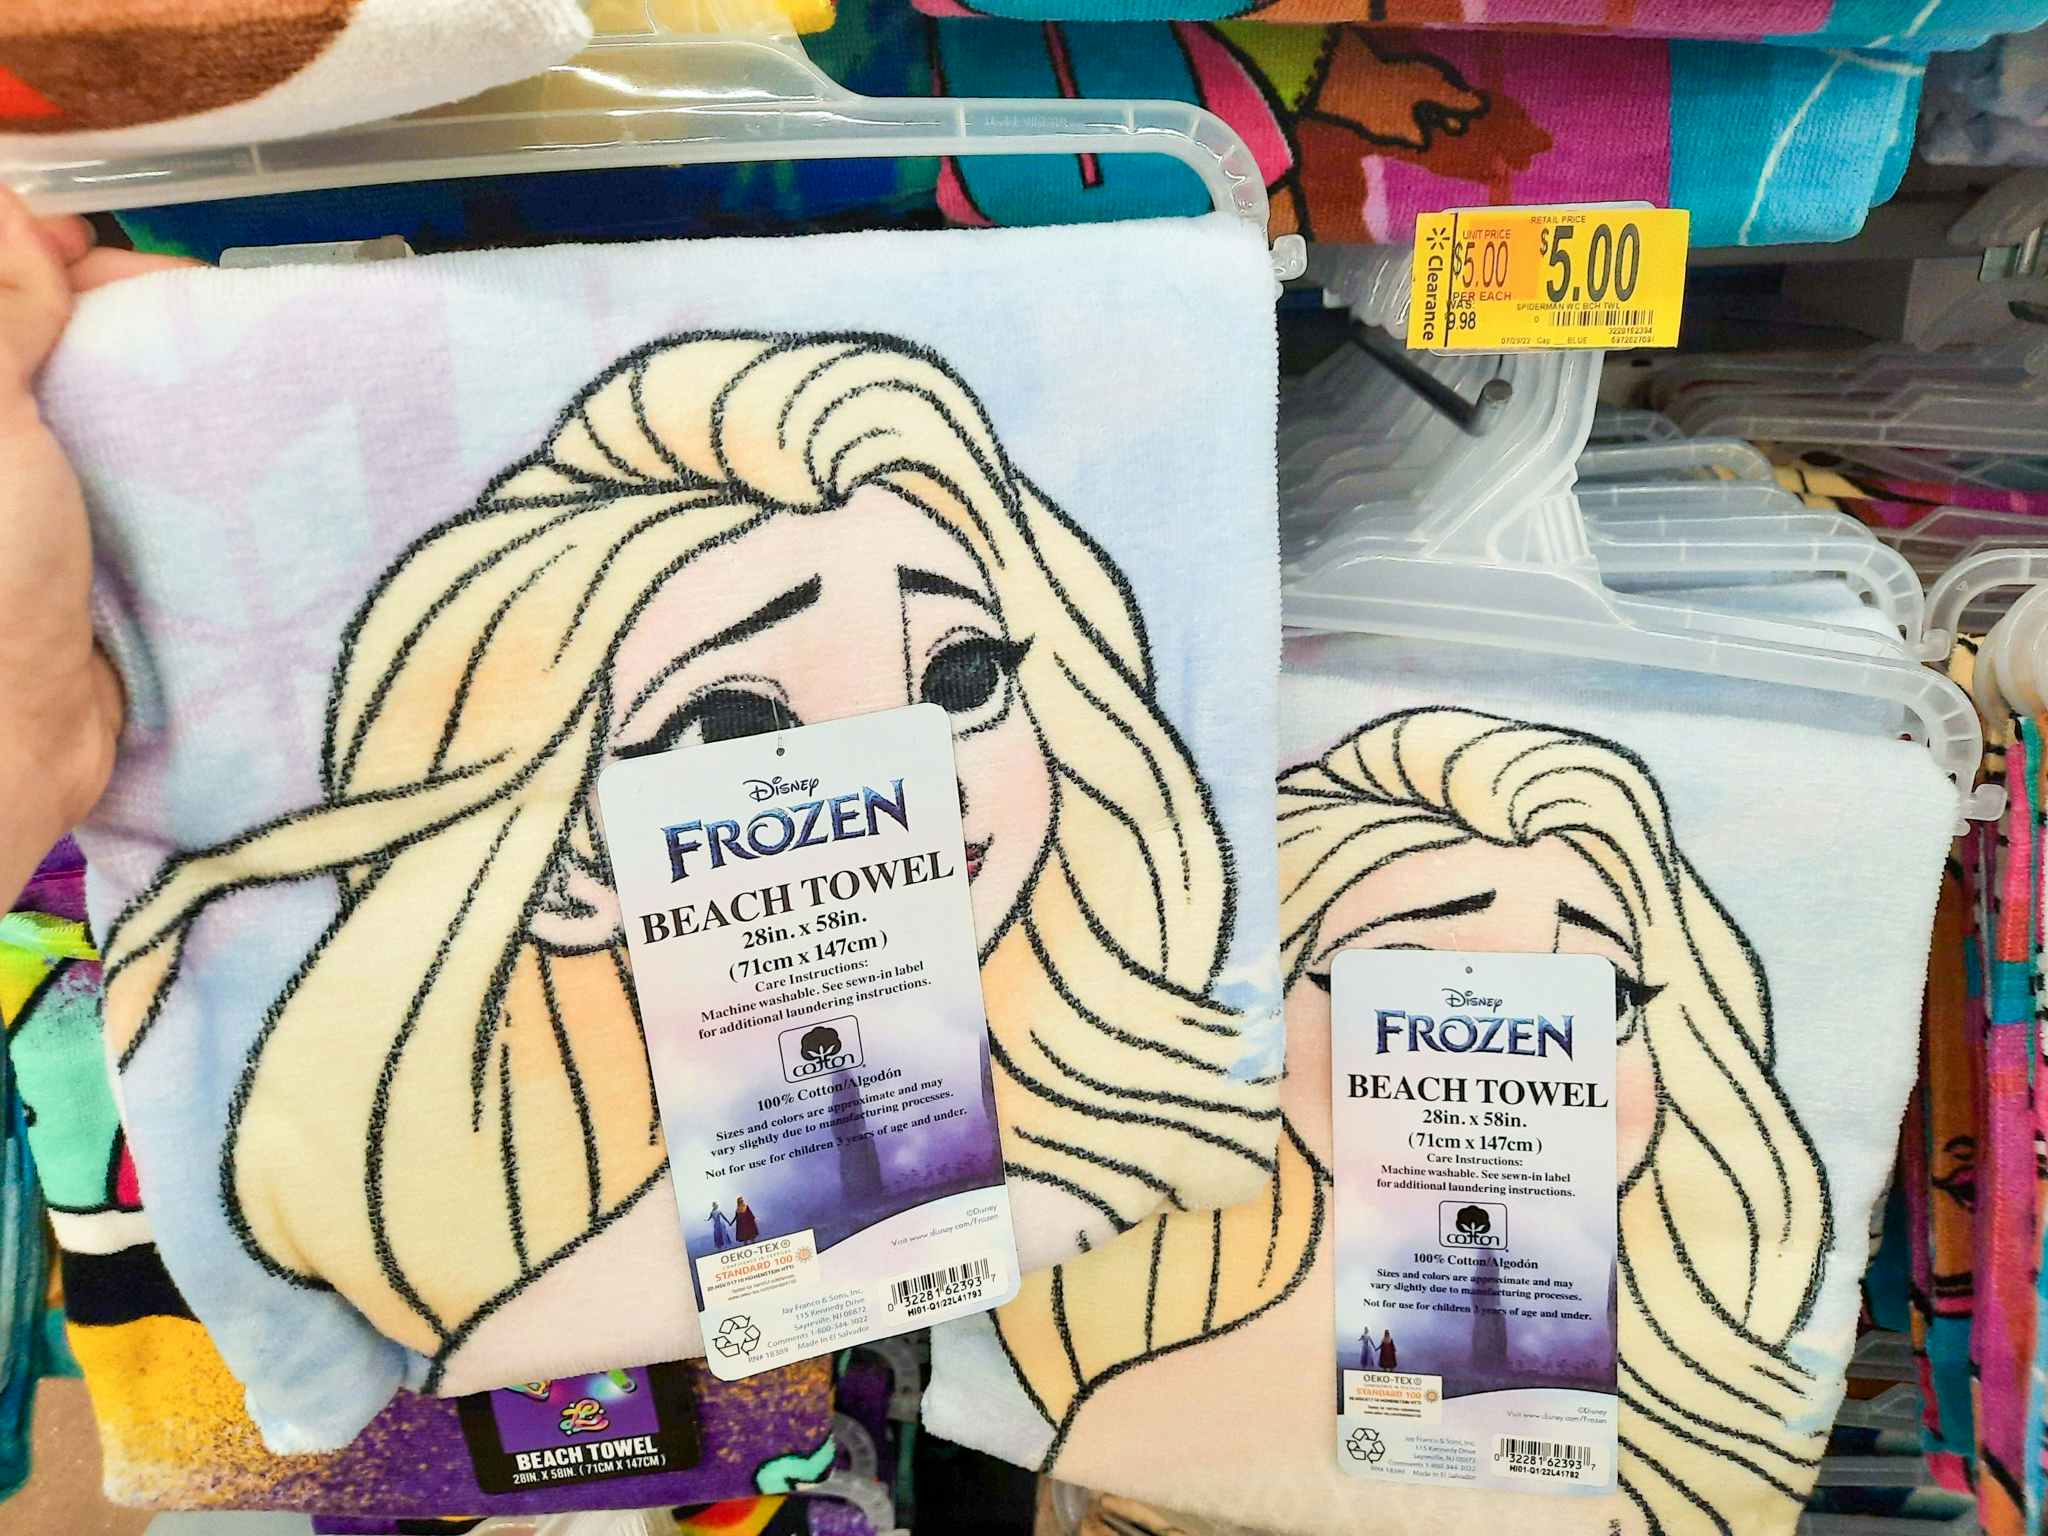 Disney Frozen Beach Towel held in front of $5 clearance tag.